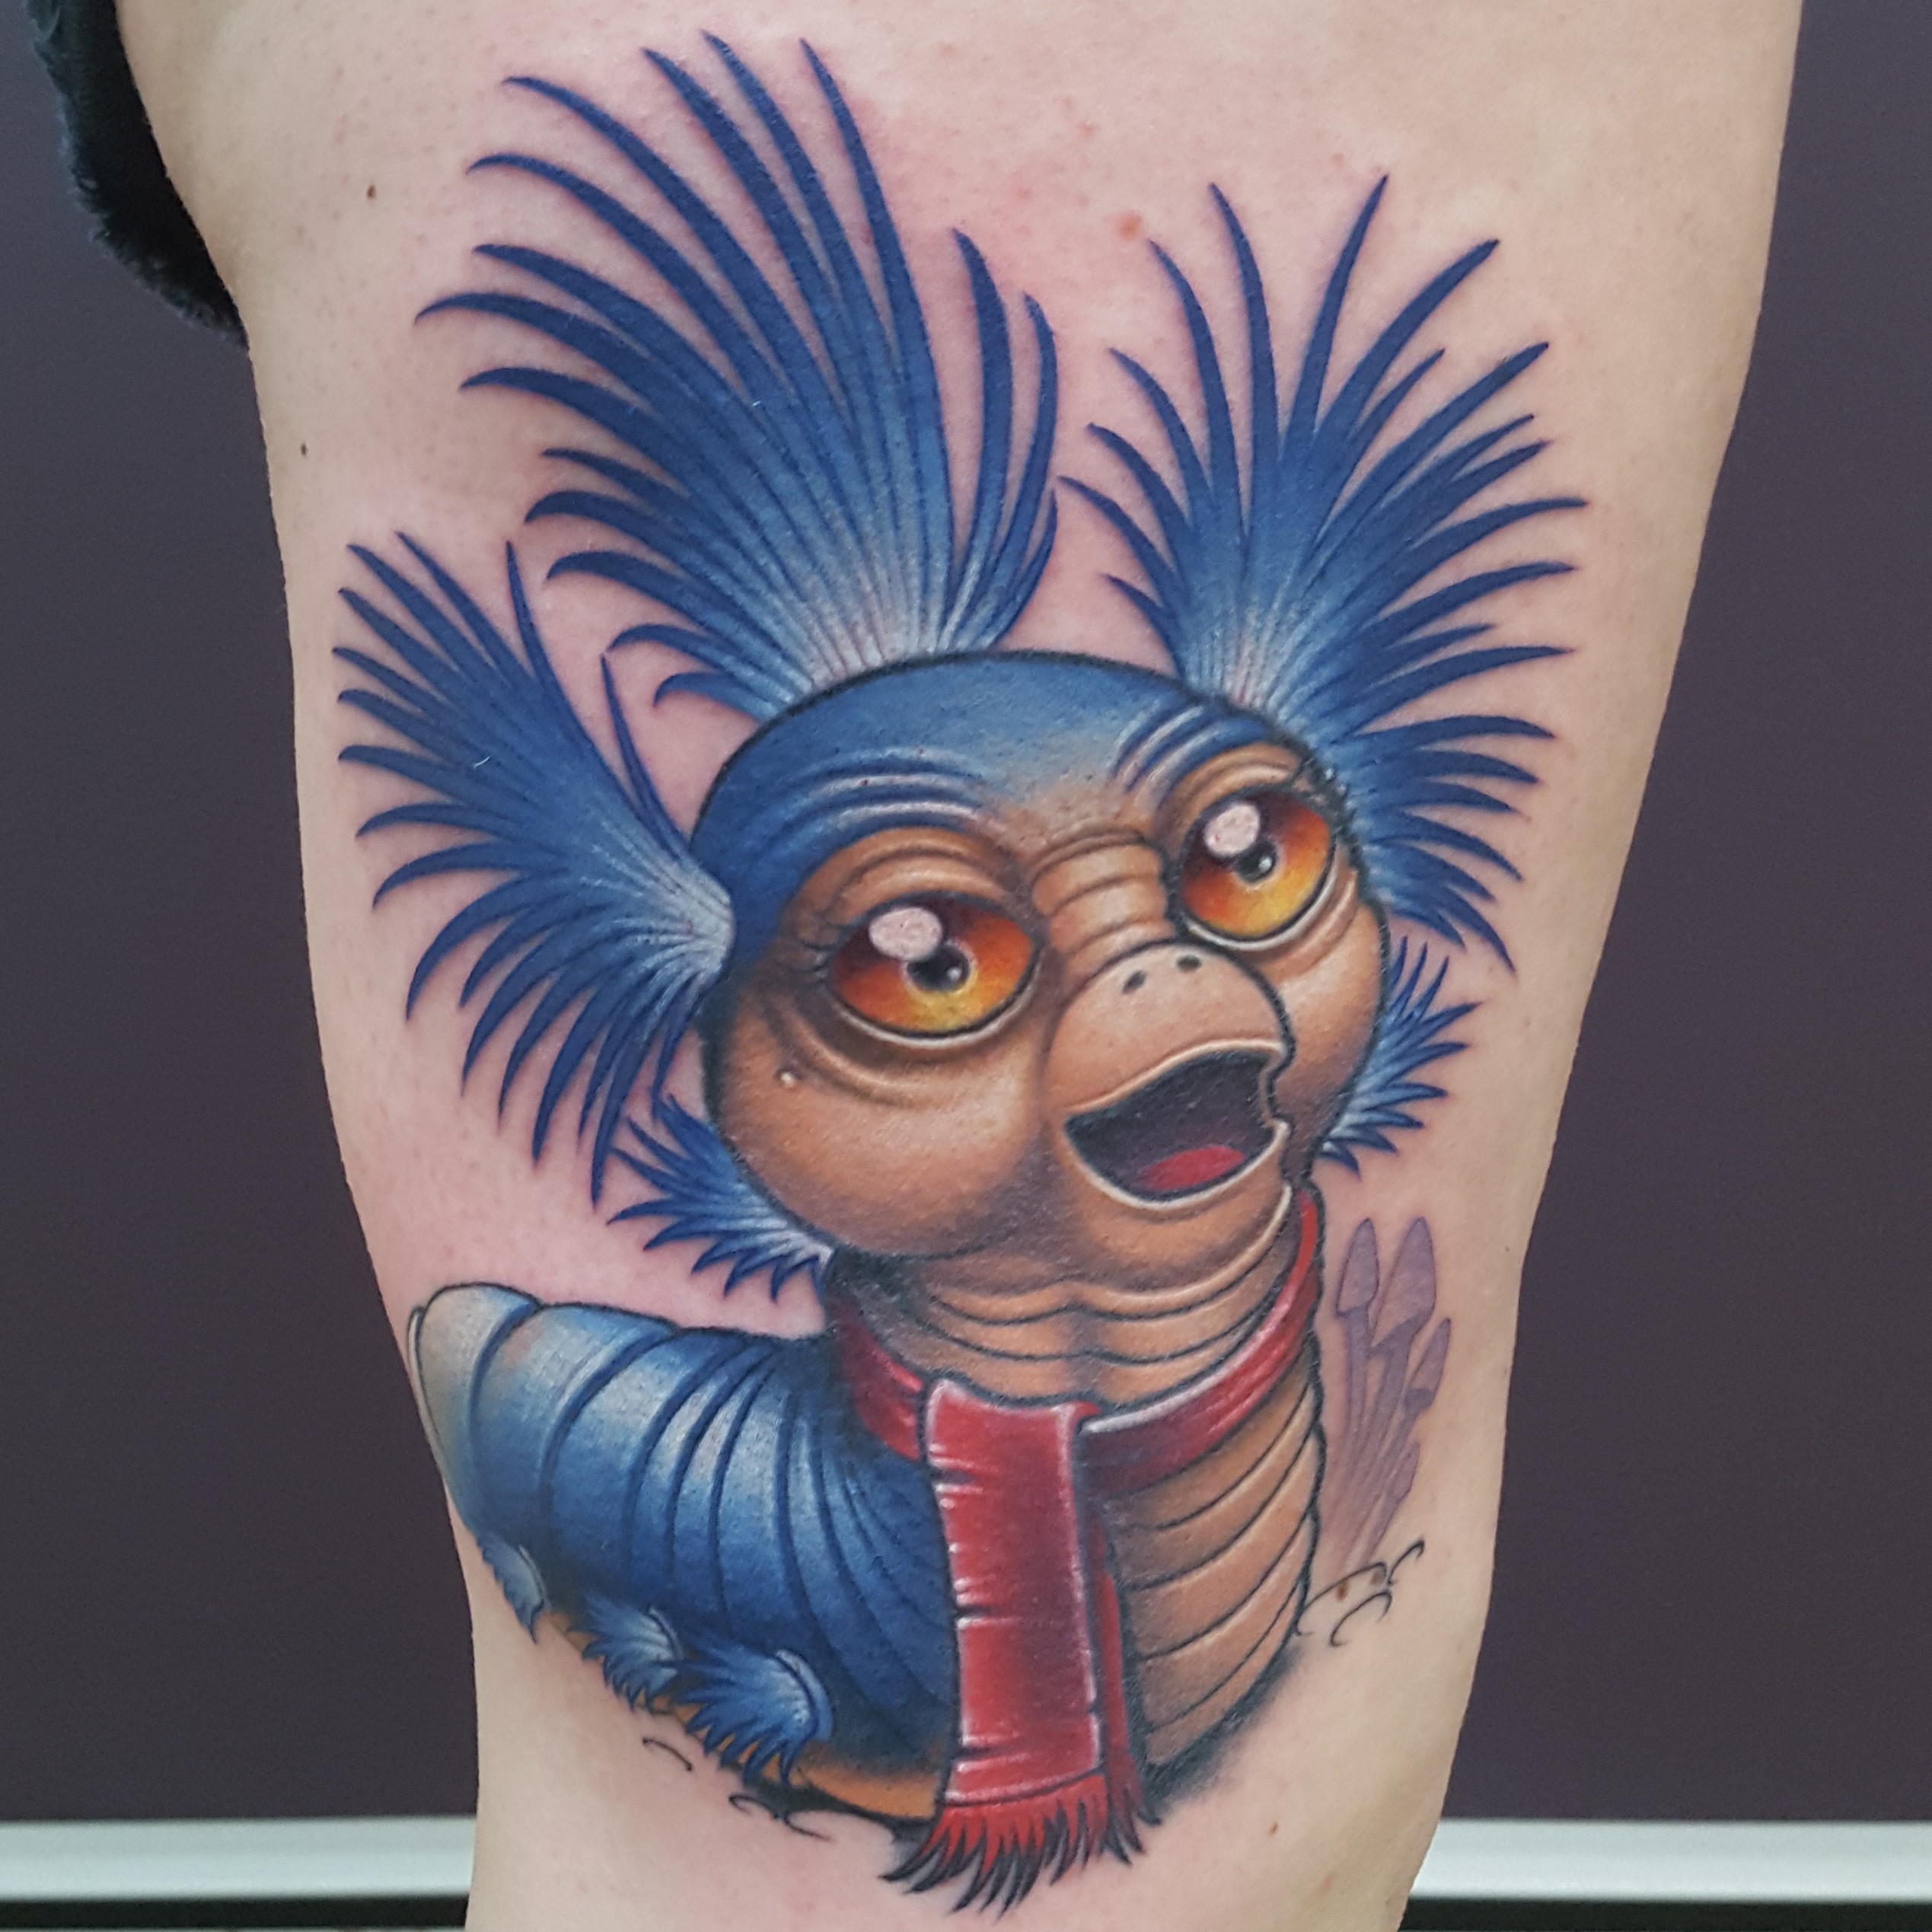 Tattoo of the Worm from Labyrinth by Cracker Joe Swider in Connecticut